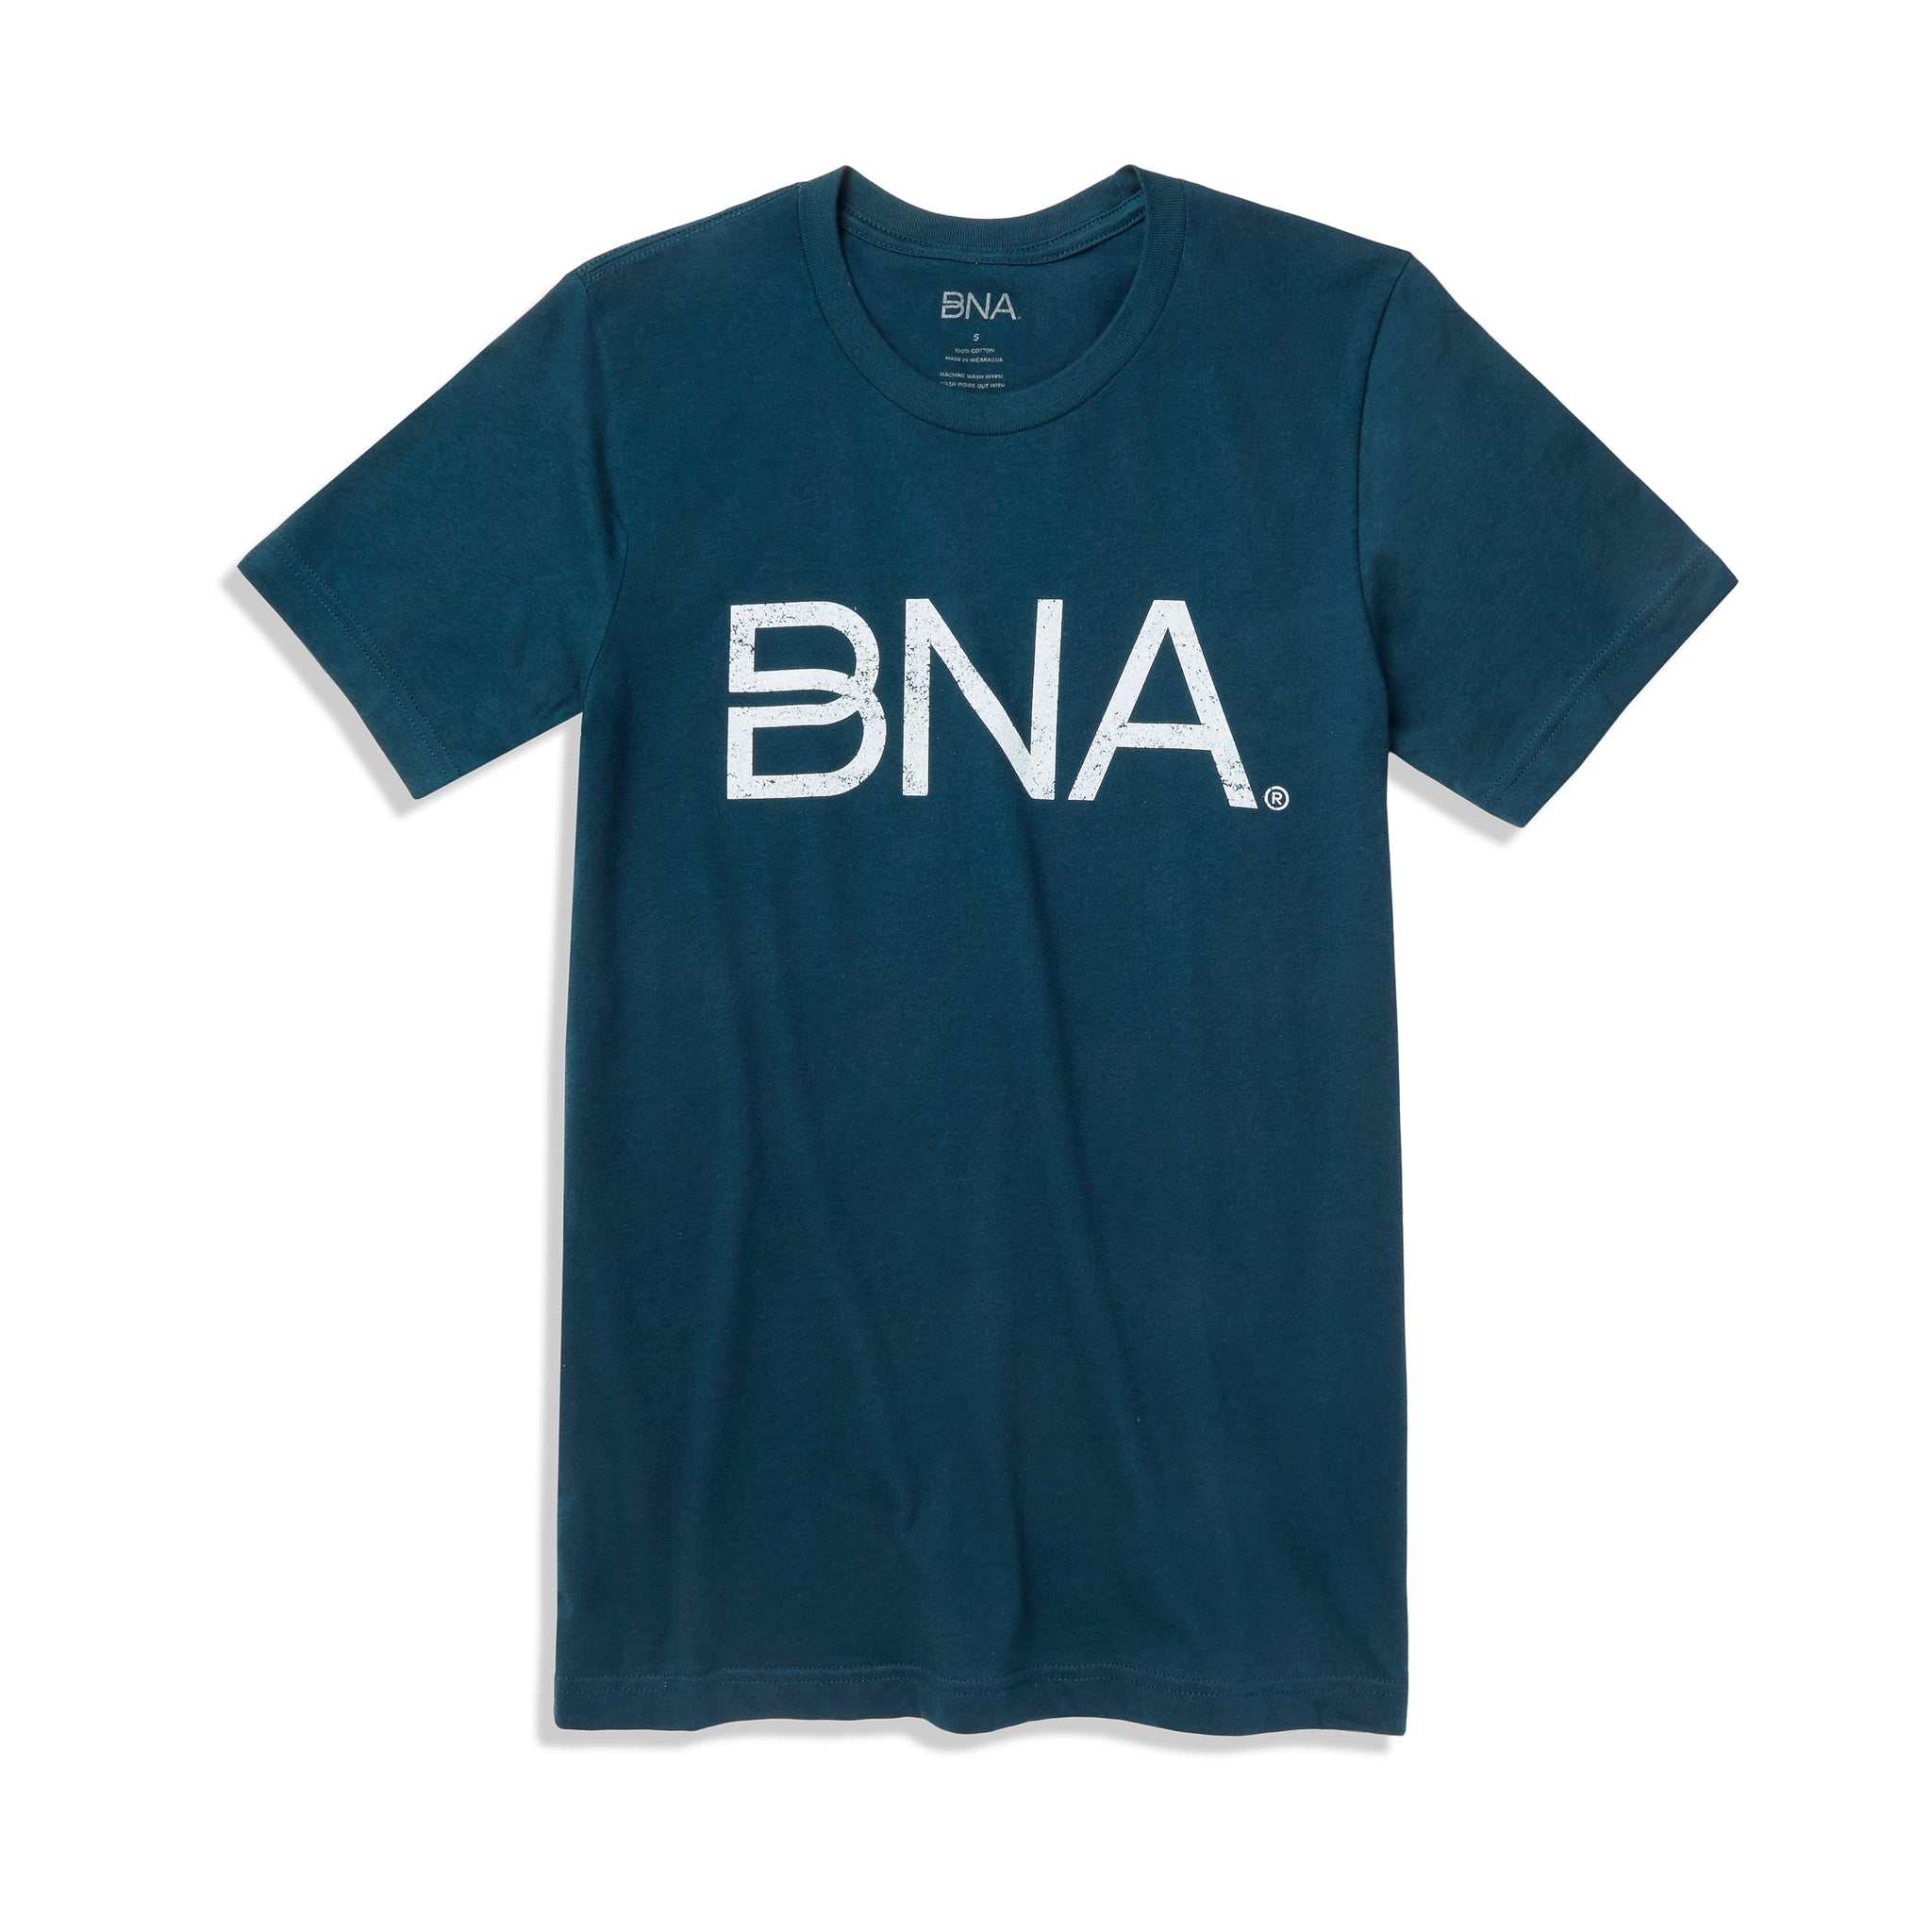 Dark teal unisex t-shirt featuring distressed white BNA logo screenprinted on center of chest.